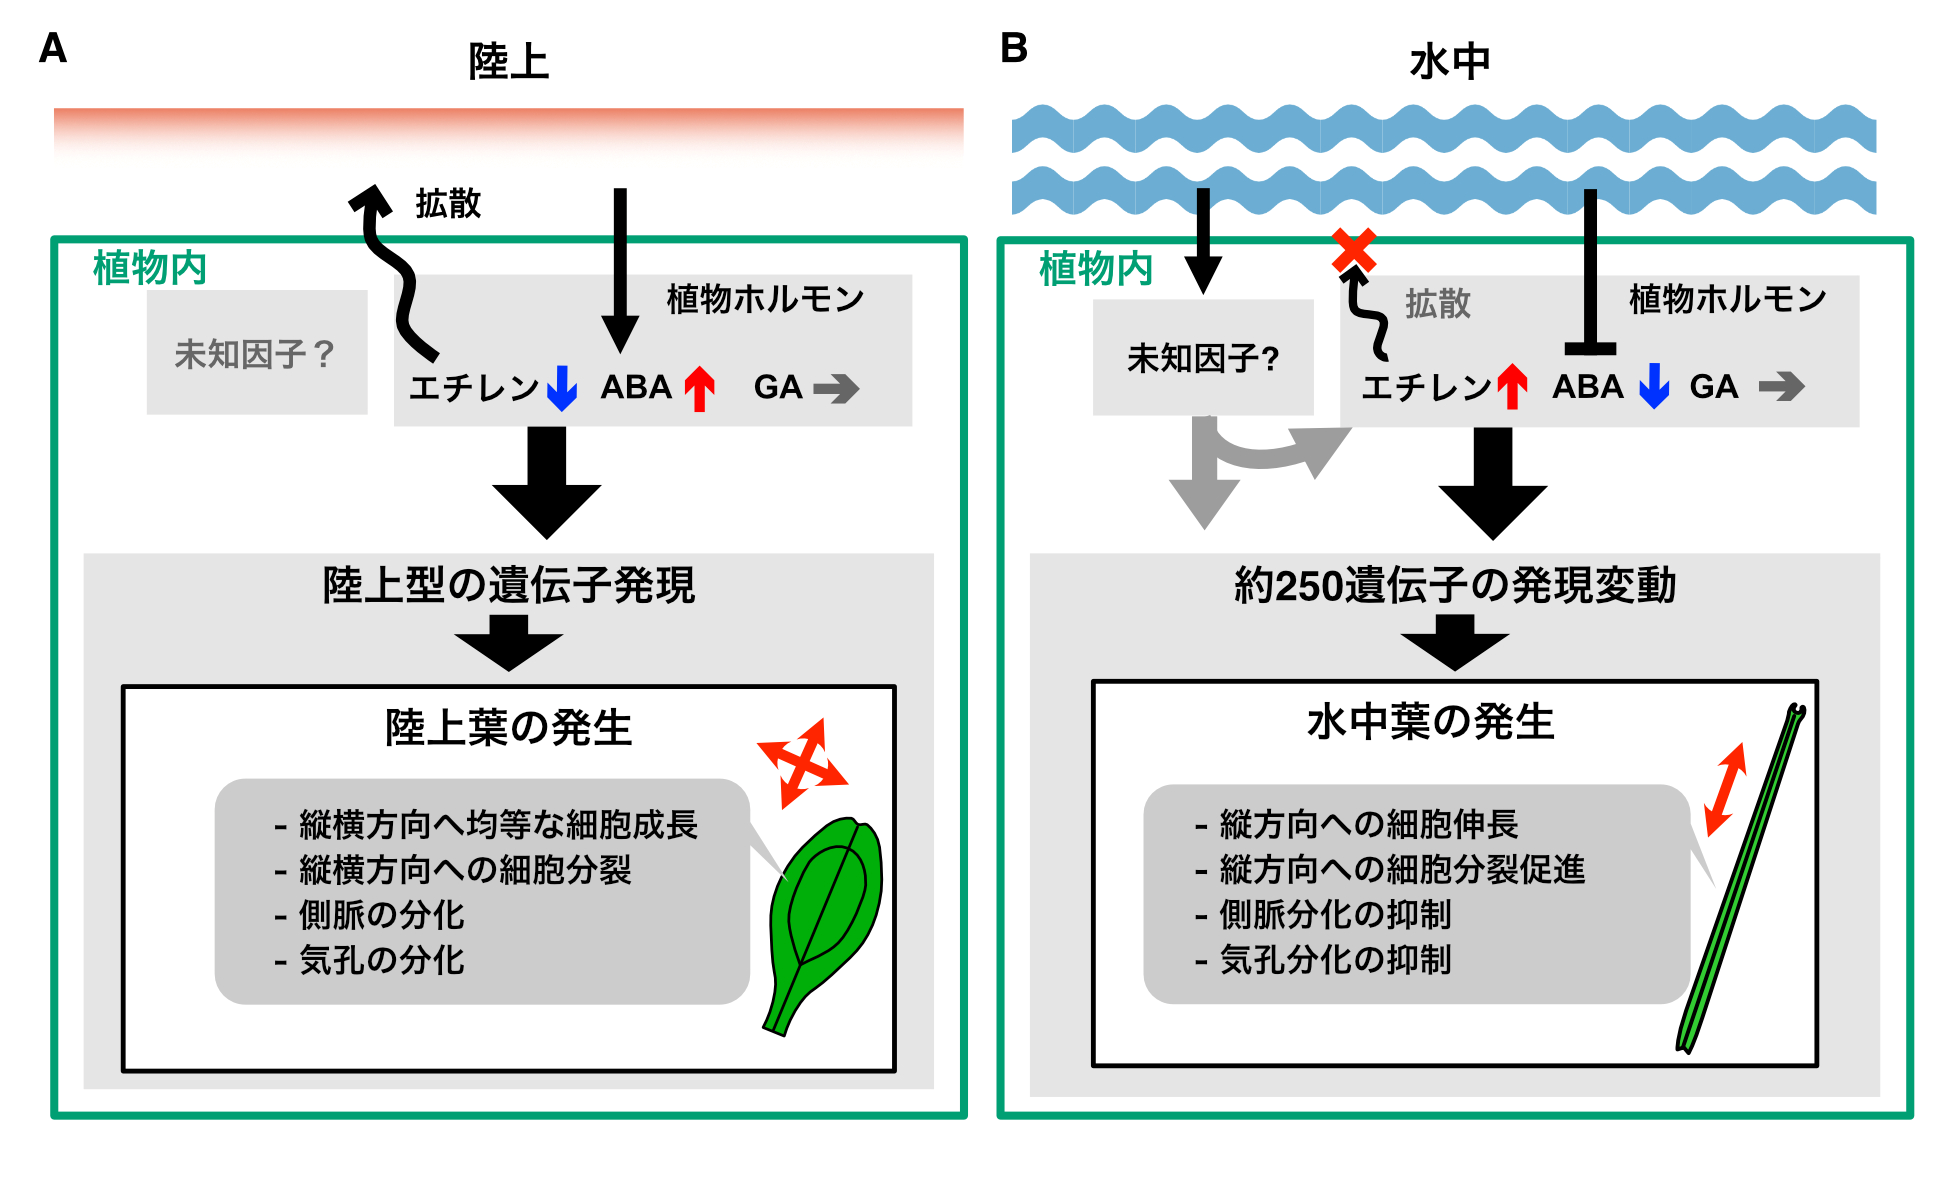 Species of algae with three sexes that all mate in pairs identified in Japanese river